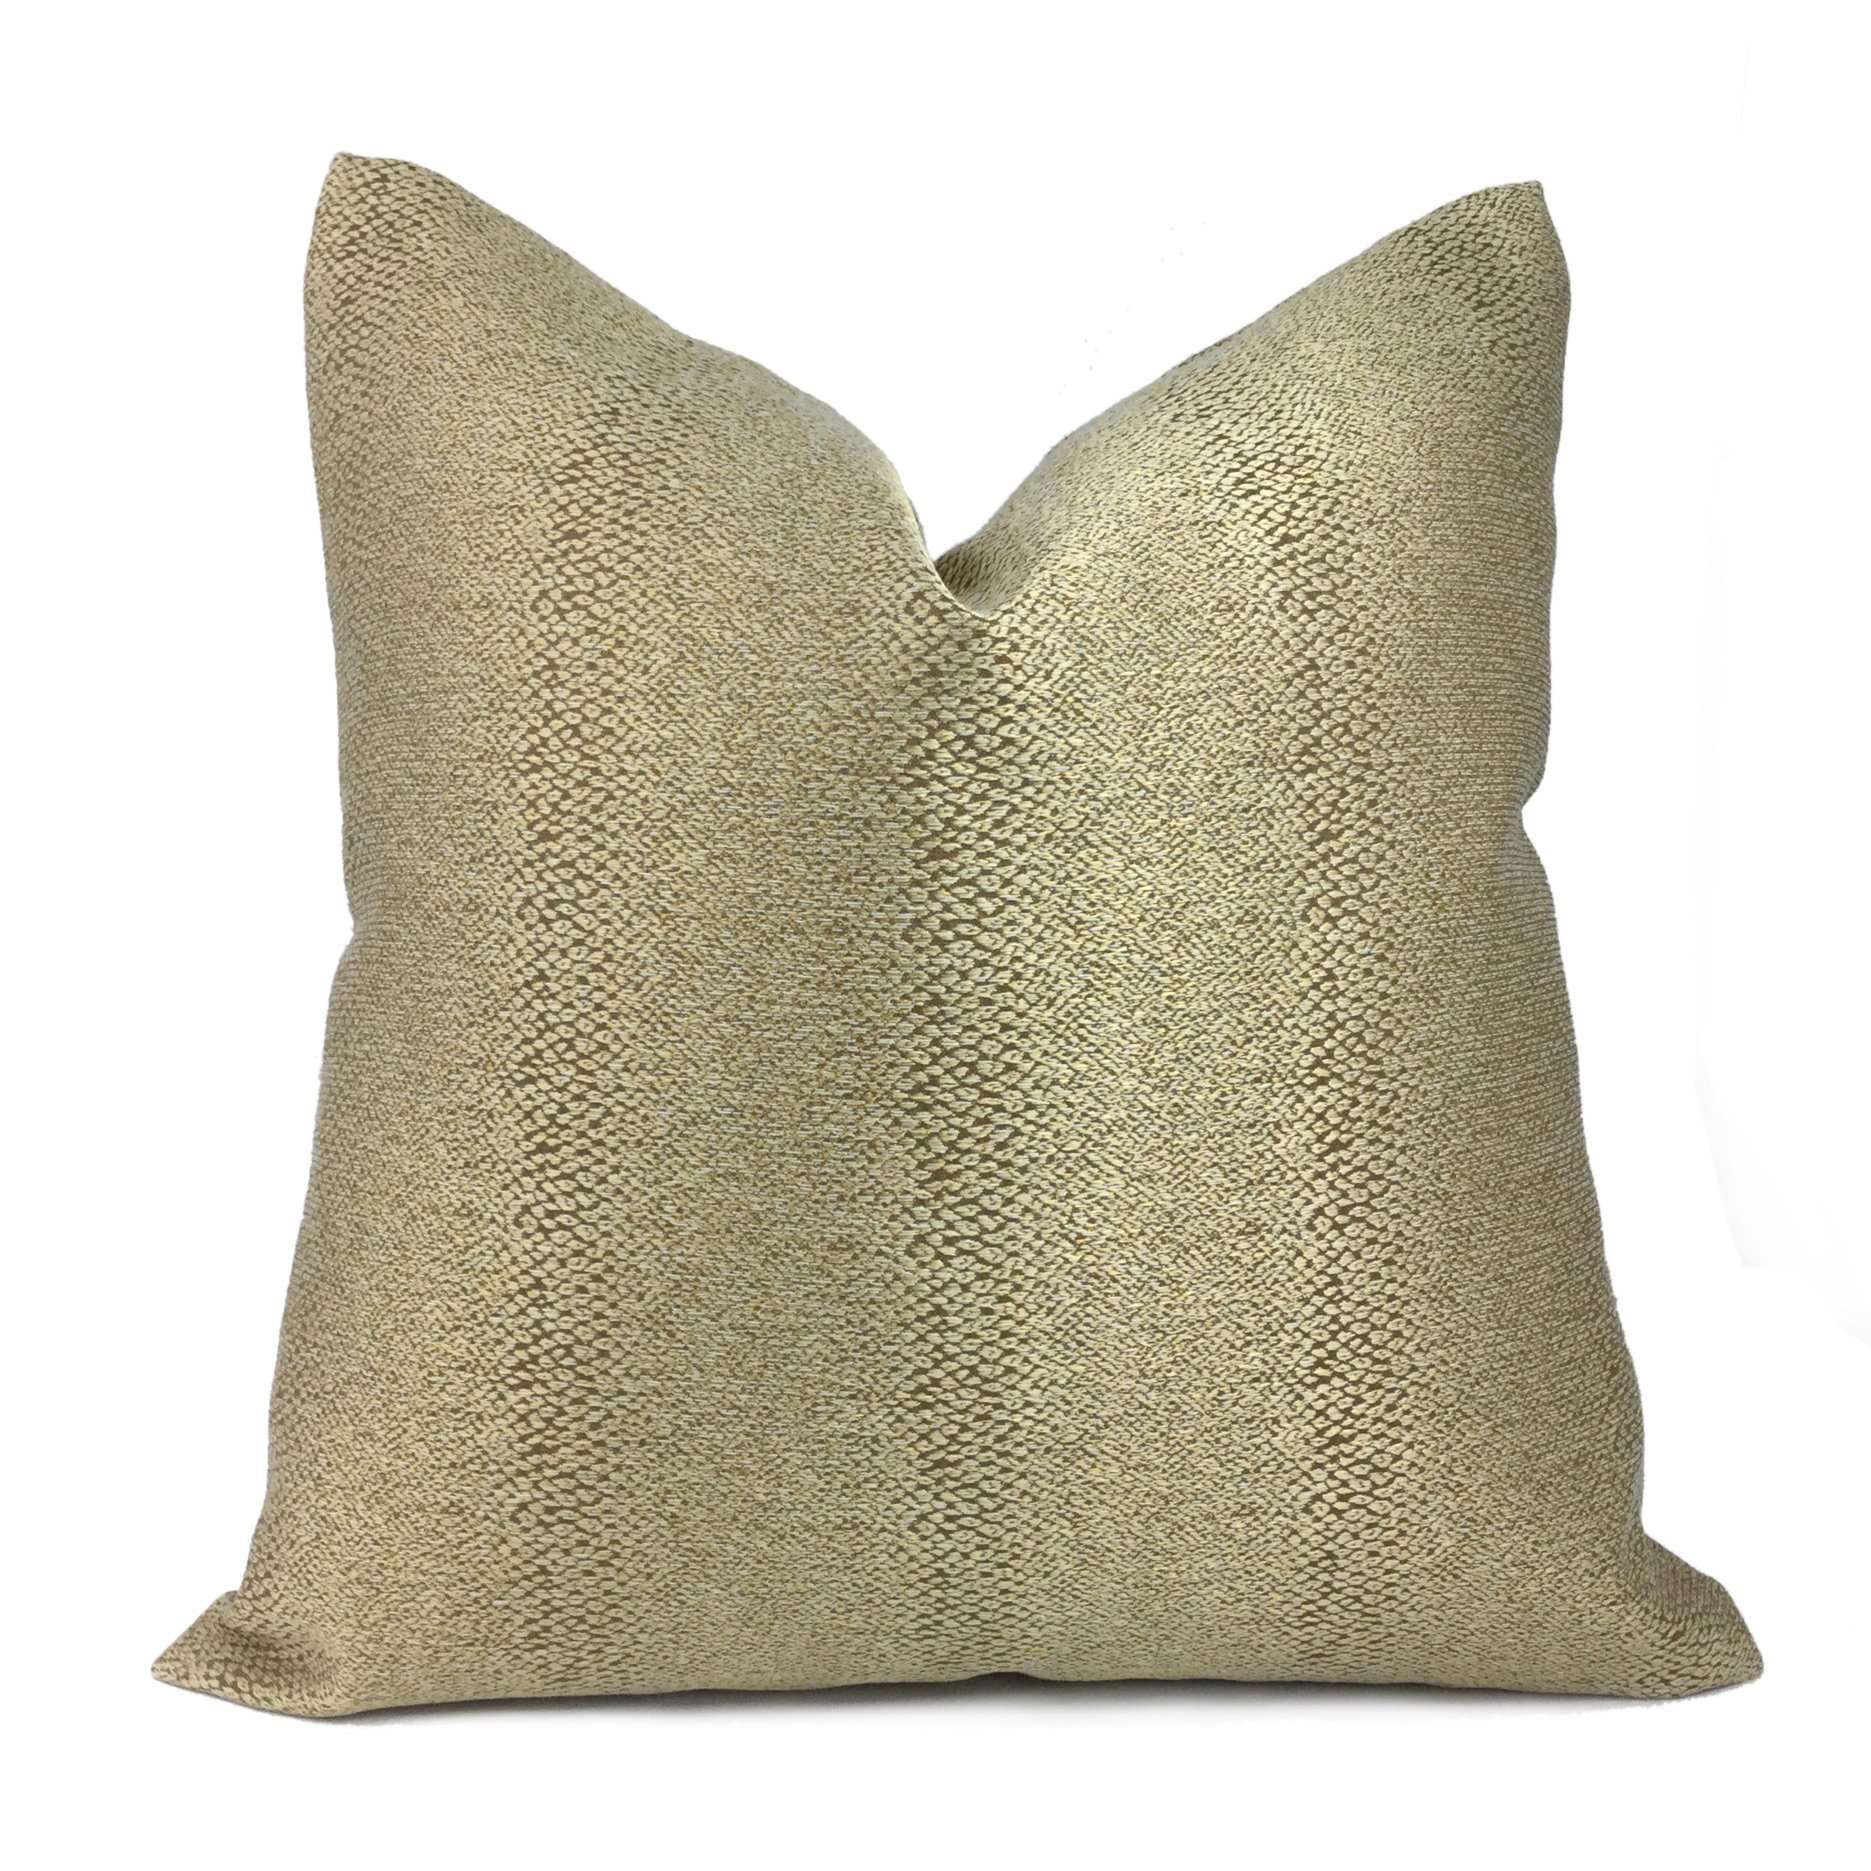 Robert Allen Glossy Slither Gold Faux Snakeskin Pillow Cover